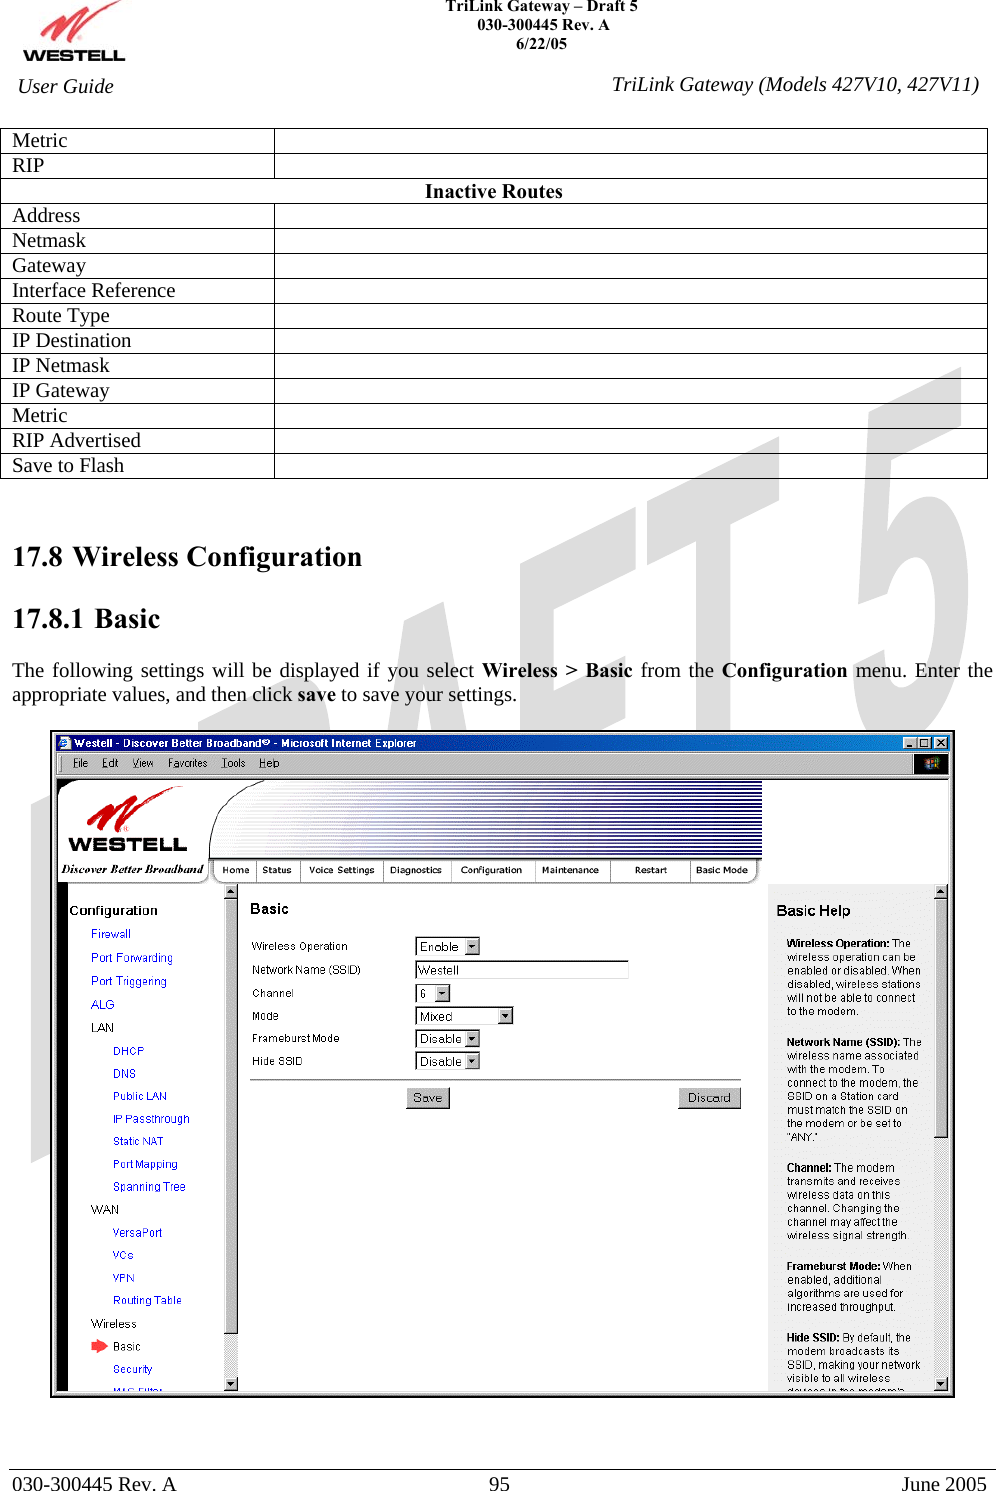    TriLink Gateway – Draft 5   030-300445 Rev. A 6/22/05   030-300445 Rev. A  95  June 2005  User Guide  TriLink Gateway (Models 427V10, 427V11)Metric  RIP  Inactive Routes Address  Netmask  Gateway  Interface Reference   Route Type   IP Destination   IP Netmask   IP Gateway    Metric  RIP Advertised   Save to Flash     17.8 Wireless Configuration  17.8.1   Basic  The following settings will be displayed if you select Wireless &gt; Basic from the Configuration menu. Enter the appropriate values, and then click save to save your settings.     